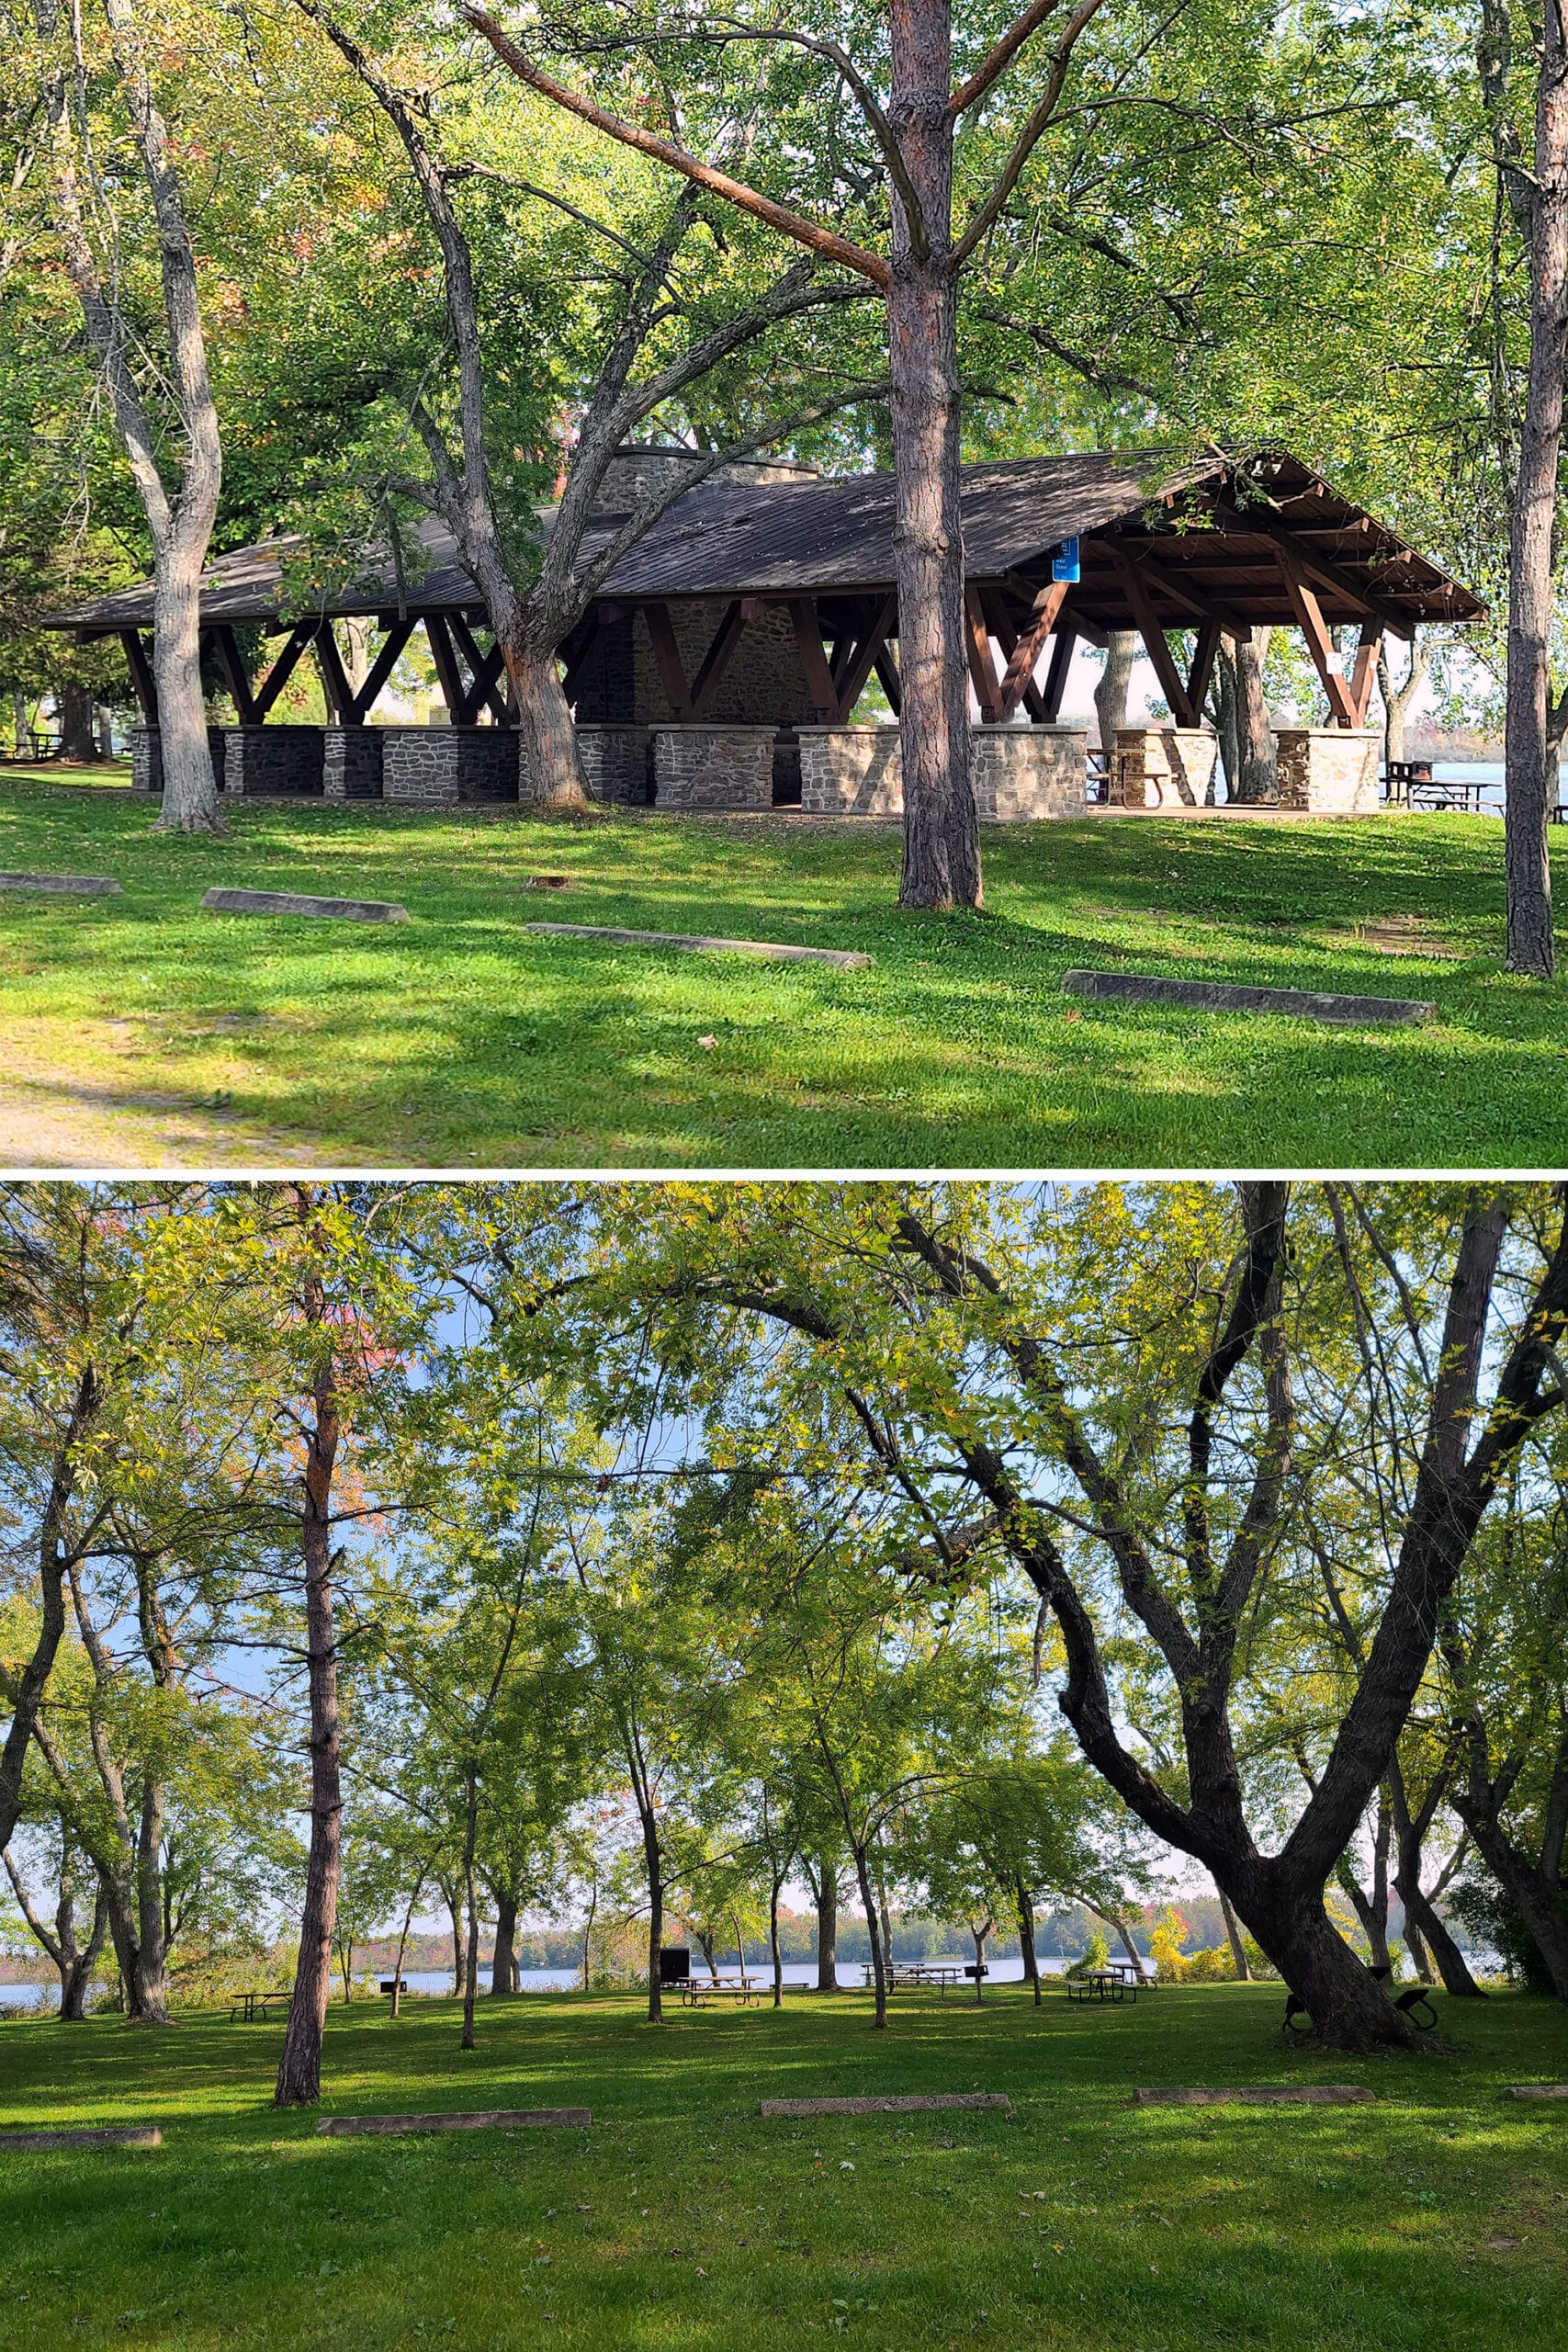 2 part image showing a covered picnic shelter, and various picnic tables on a grassy area.